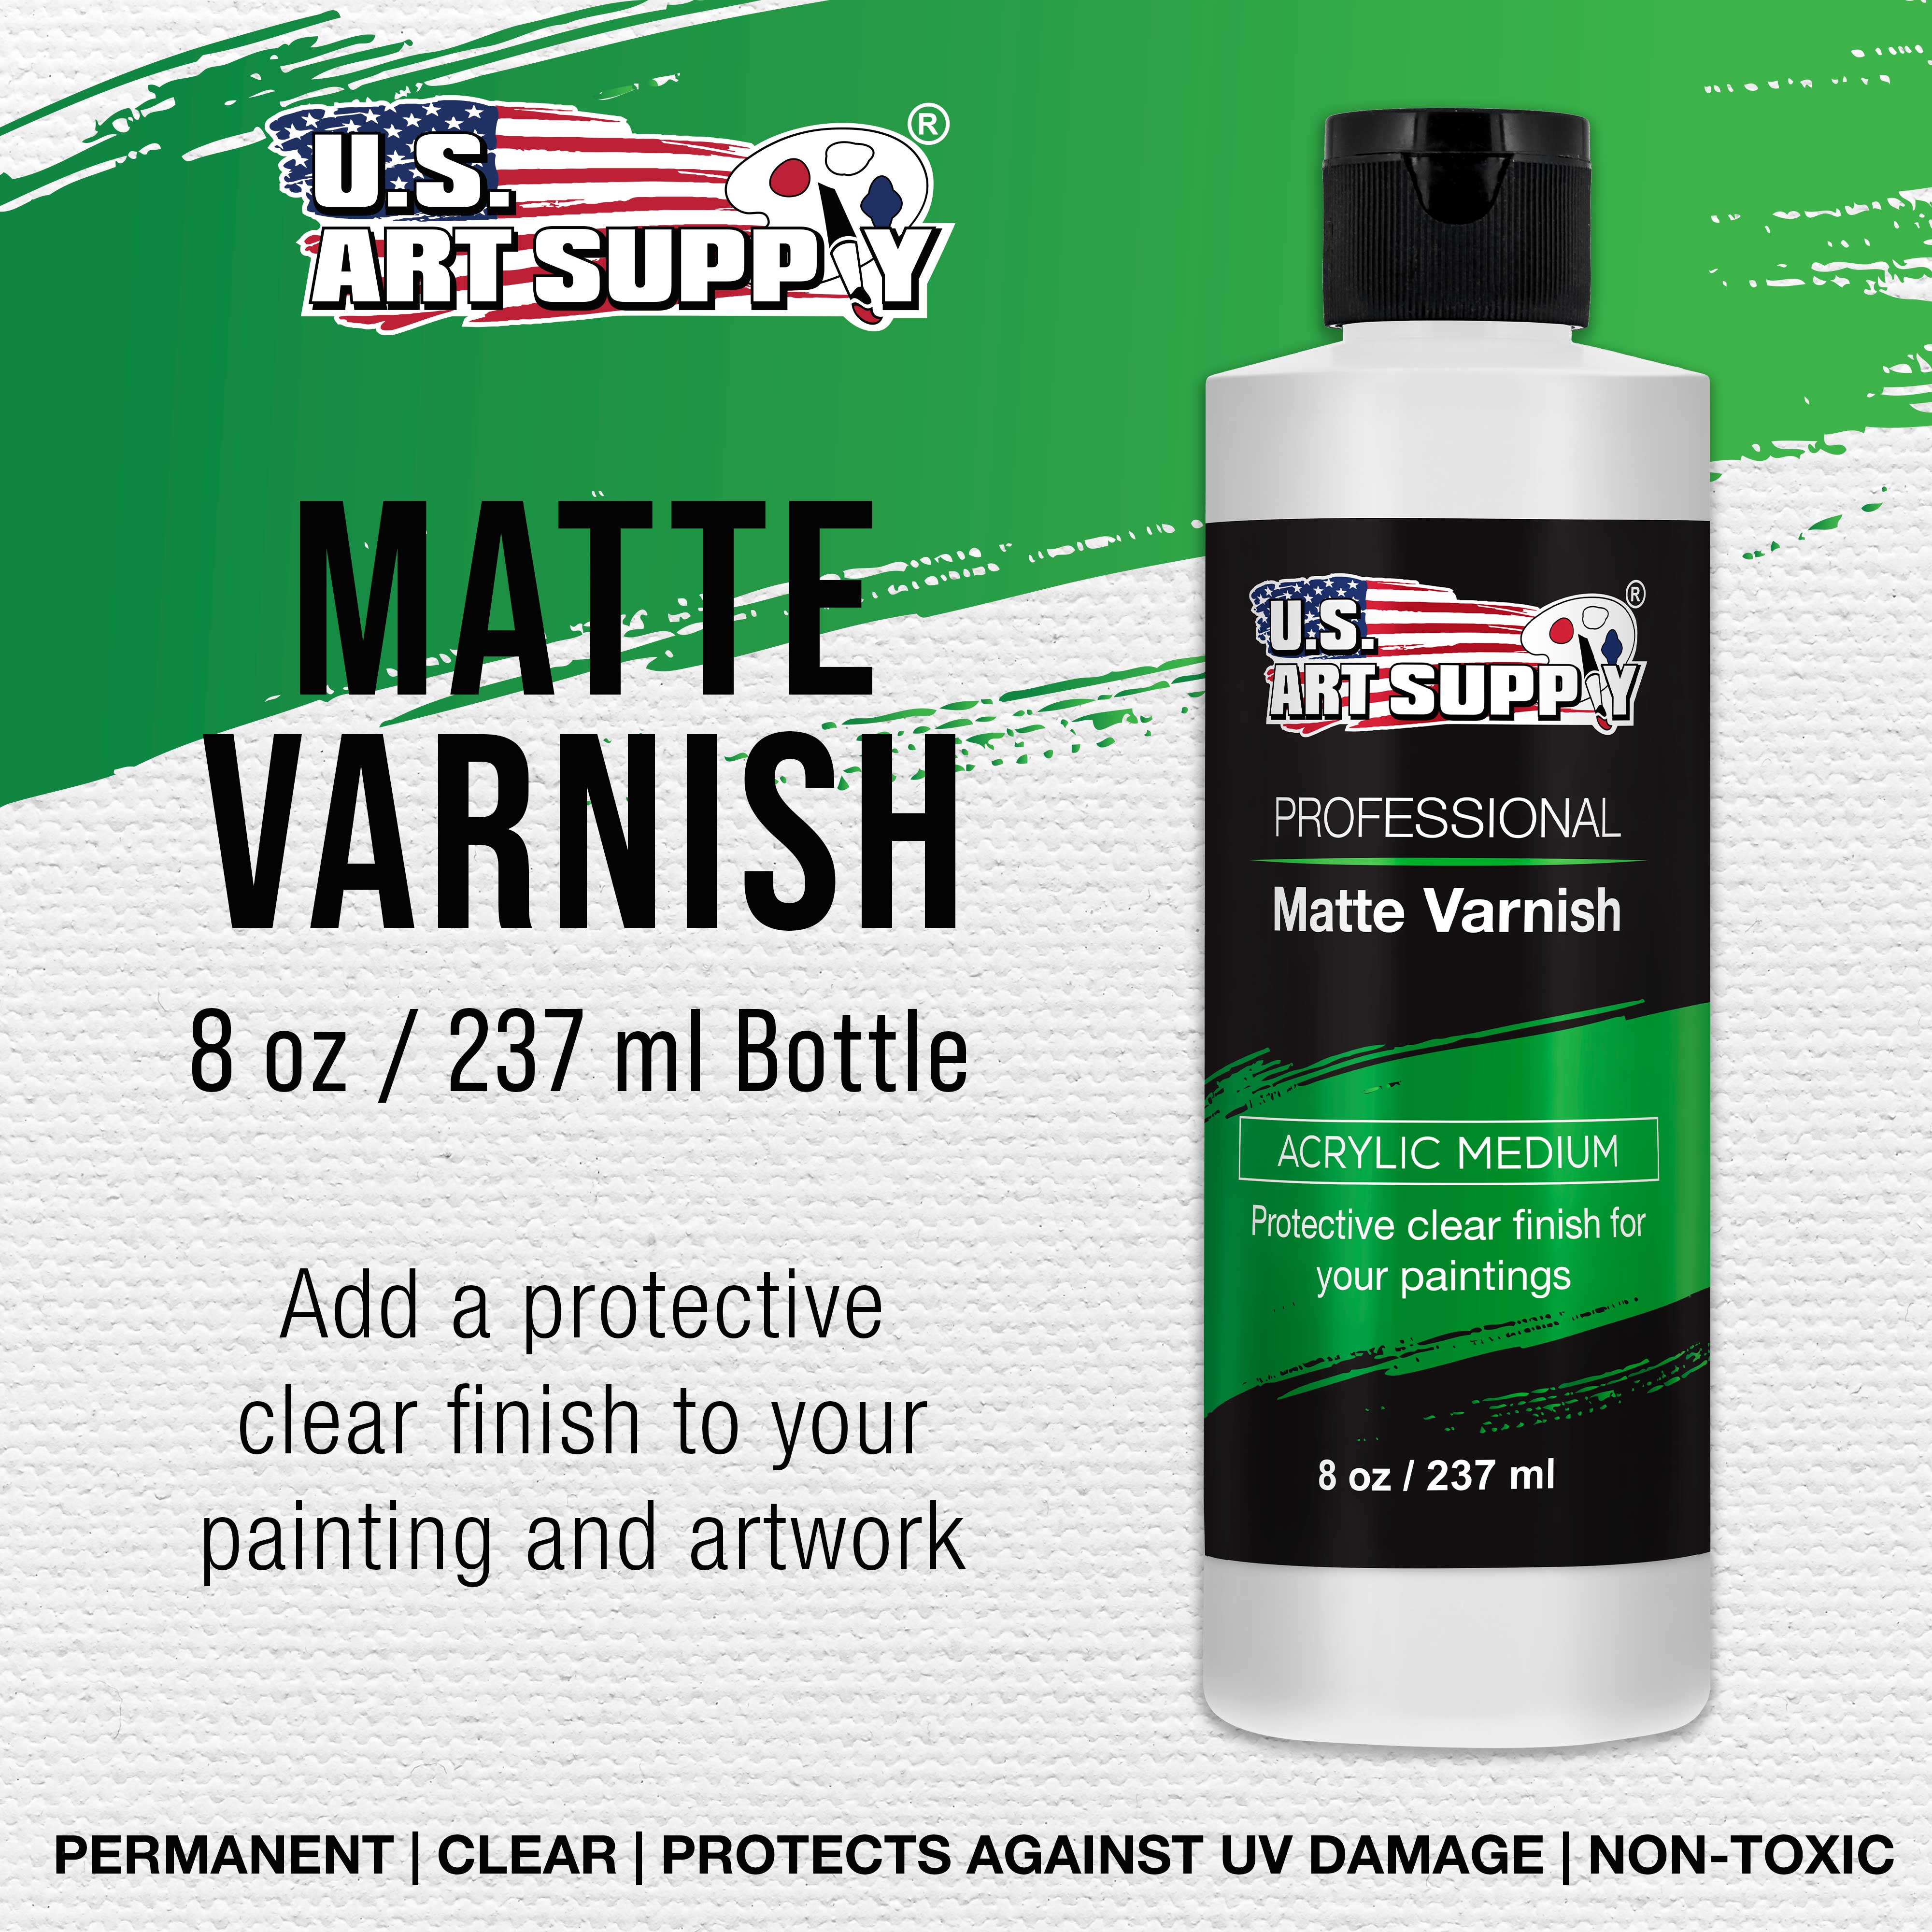 U.S. Art Supply Professional Matte Varnish, 8 Ounce - Acrylic Medium, Clear Permanent Protective Finish for Paintings & Artwork, Apply Over Dry